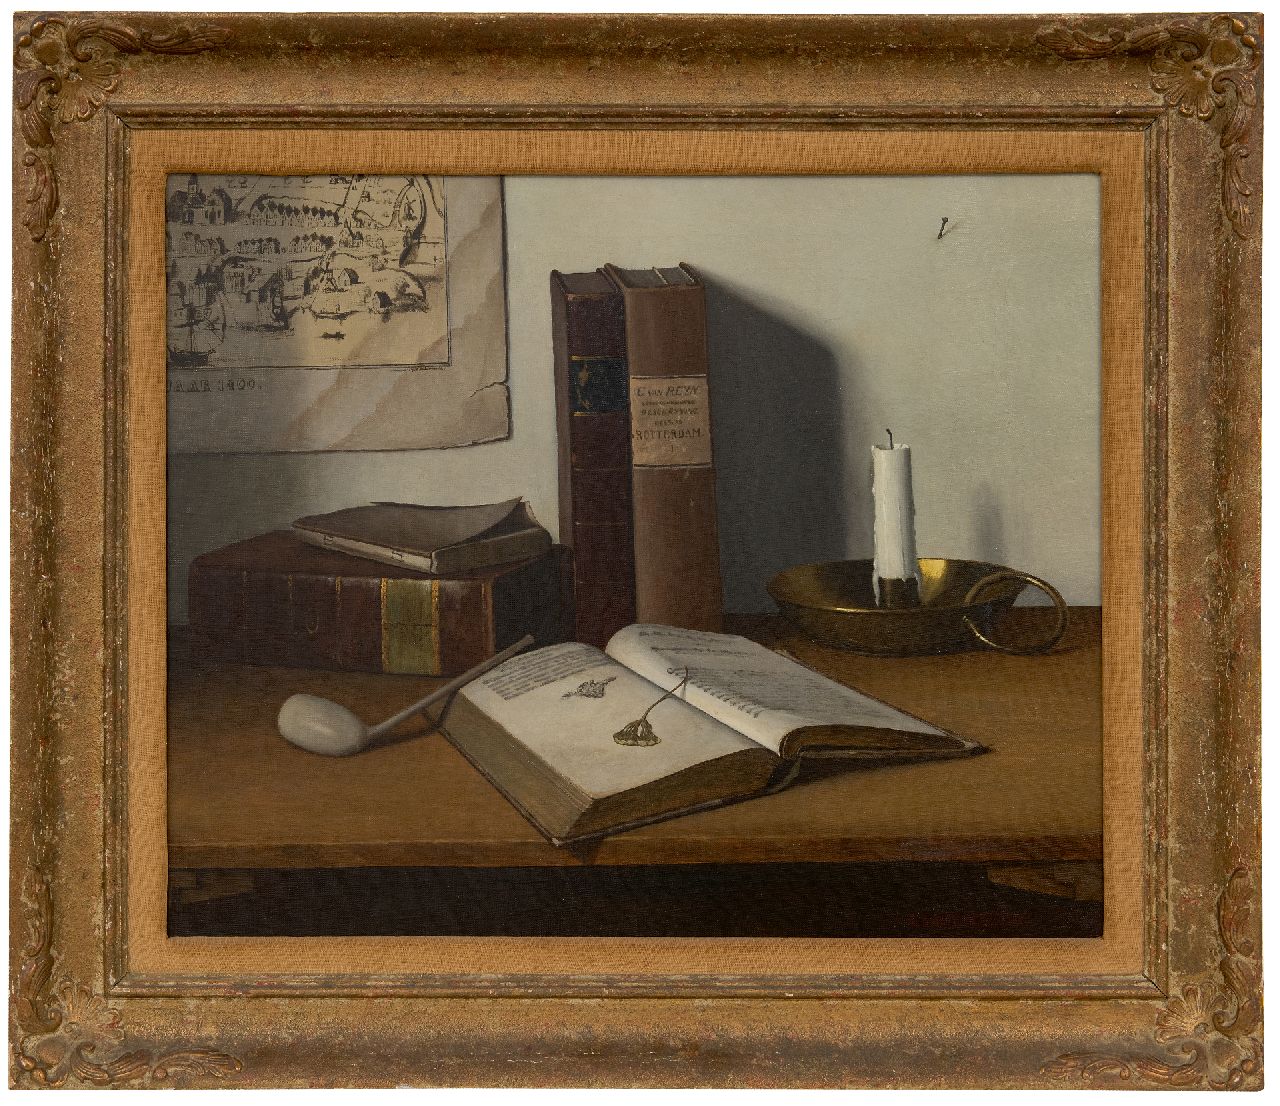 Timmers A.  | Adrianus 'Adriaan' Timmers | Paintings offered for sale | Still life with candle, pipe and books, oil on canvas, signed l.r. and dated 1935